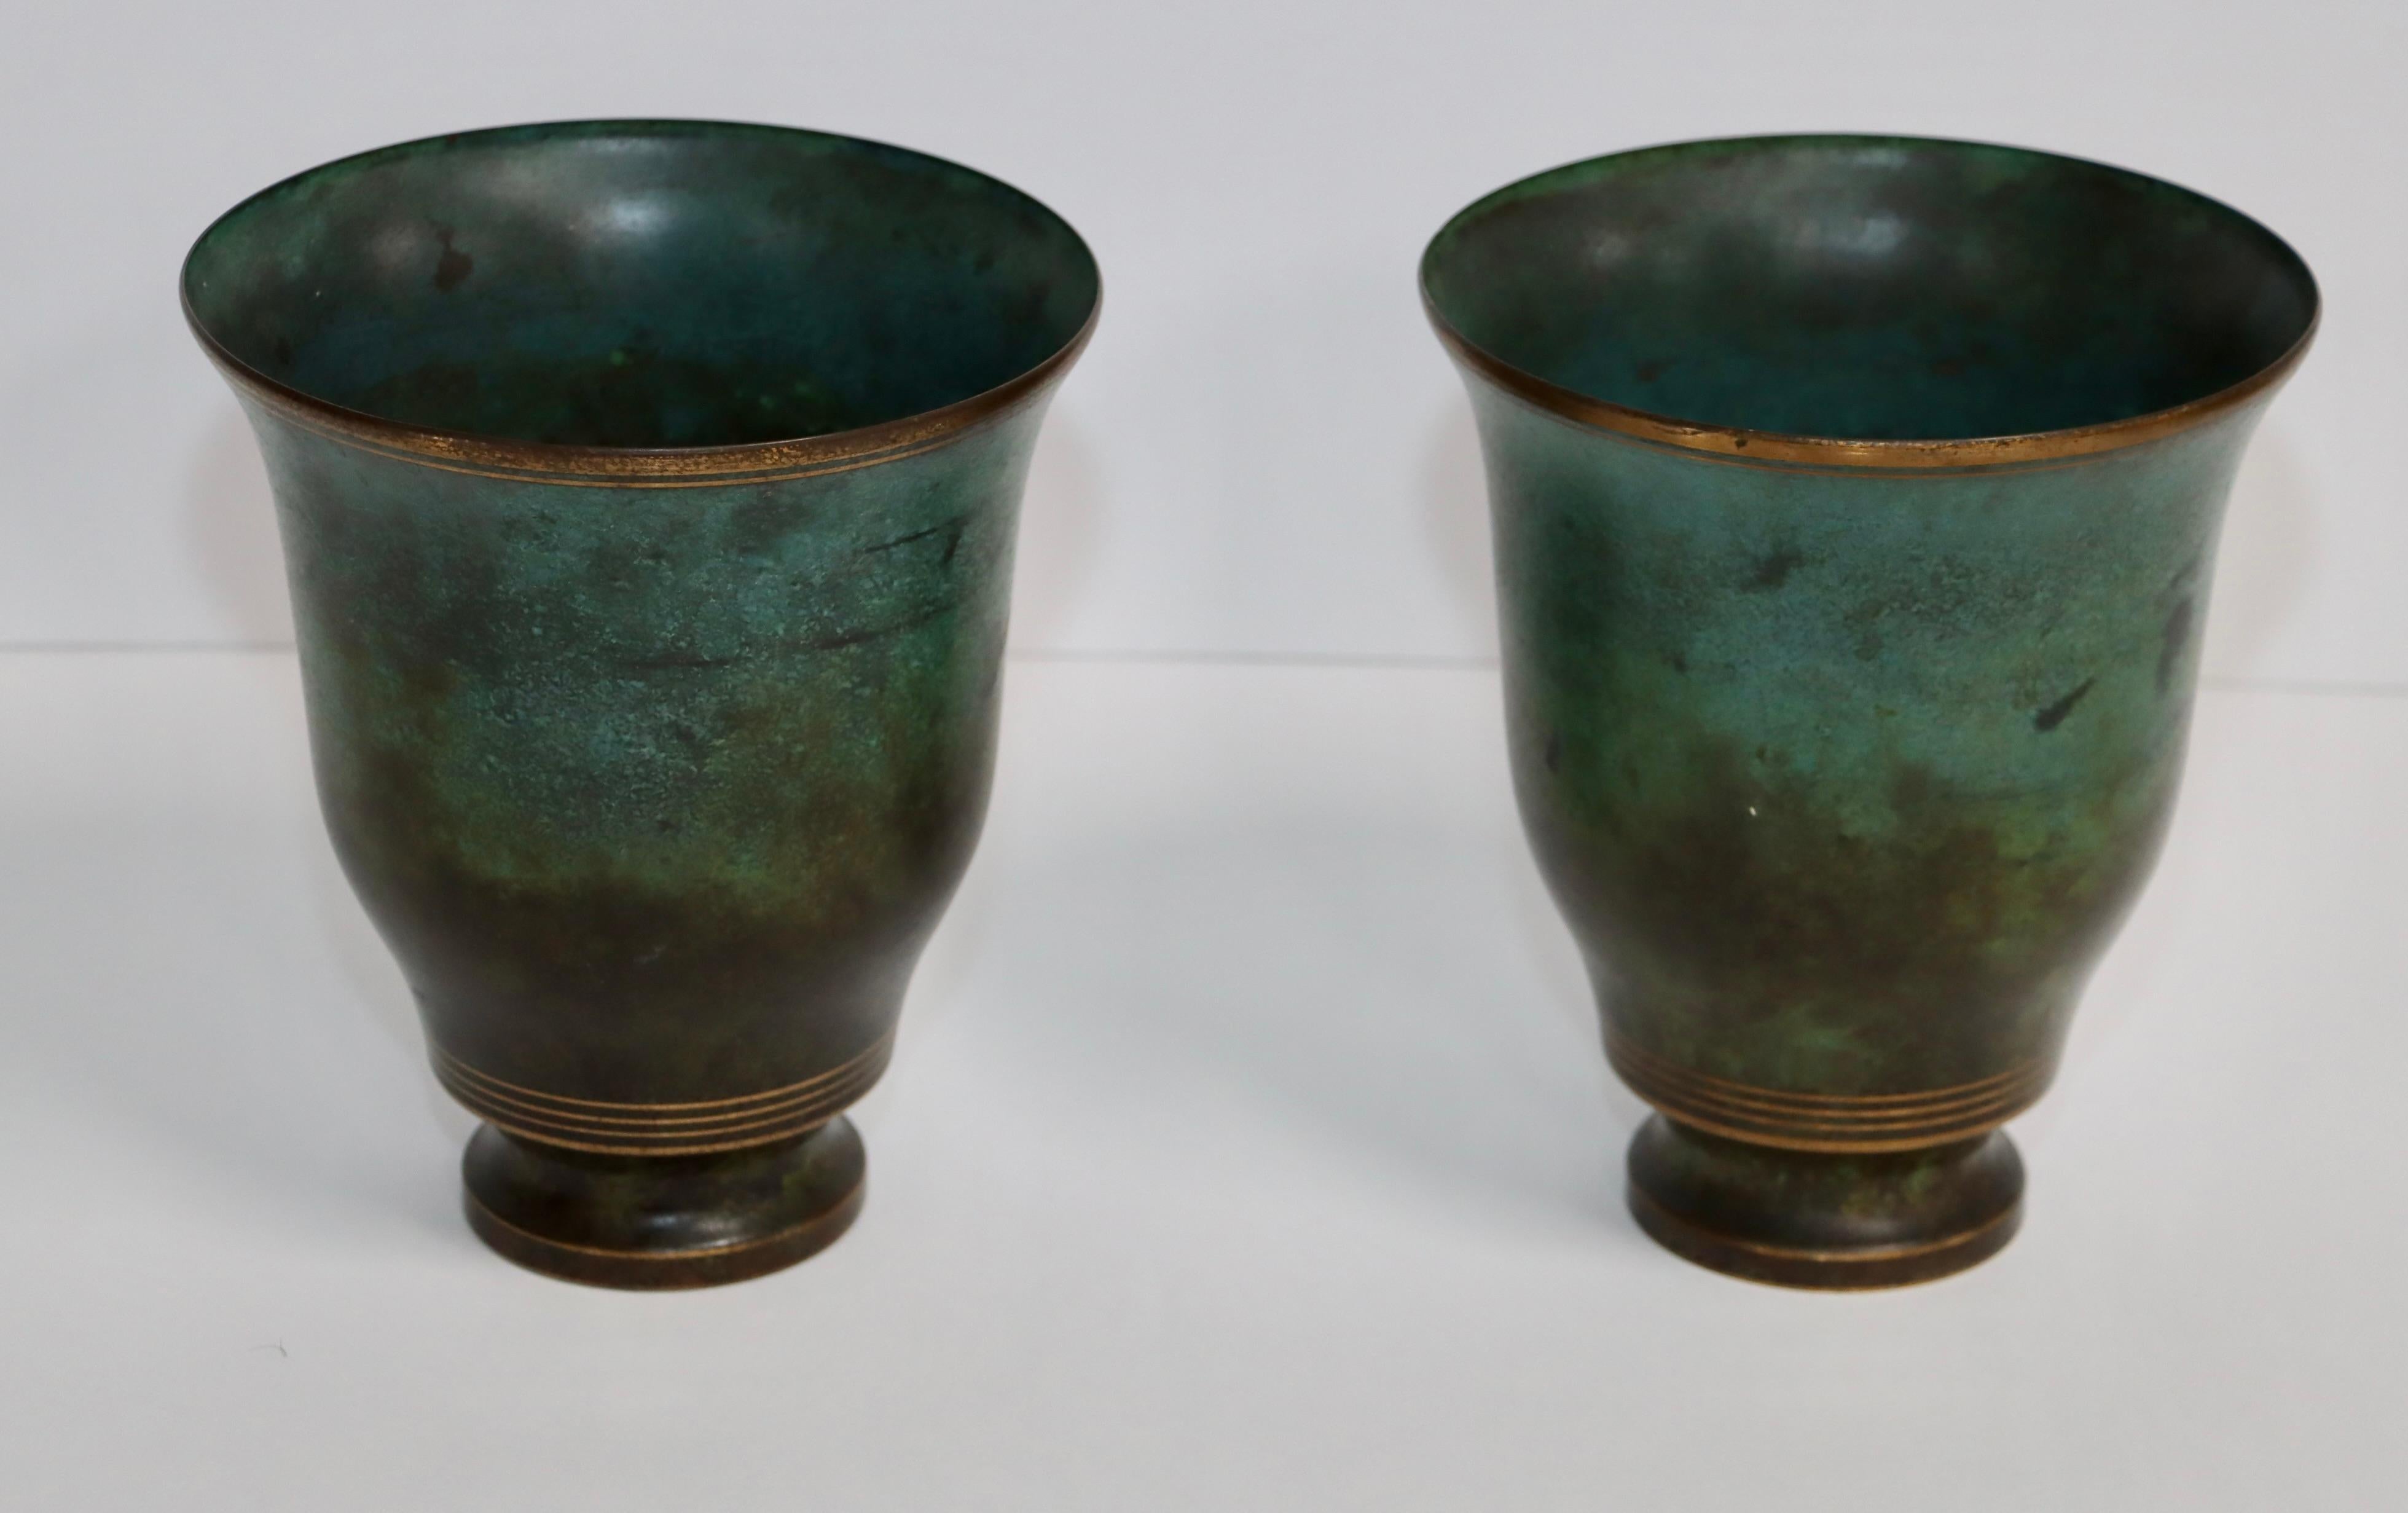 1960's mid-century modern bronze vases designed by Carl Sorensen, in vintage original condition with some wear and patina due to age and use.